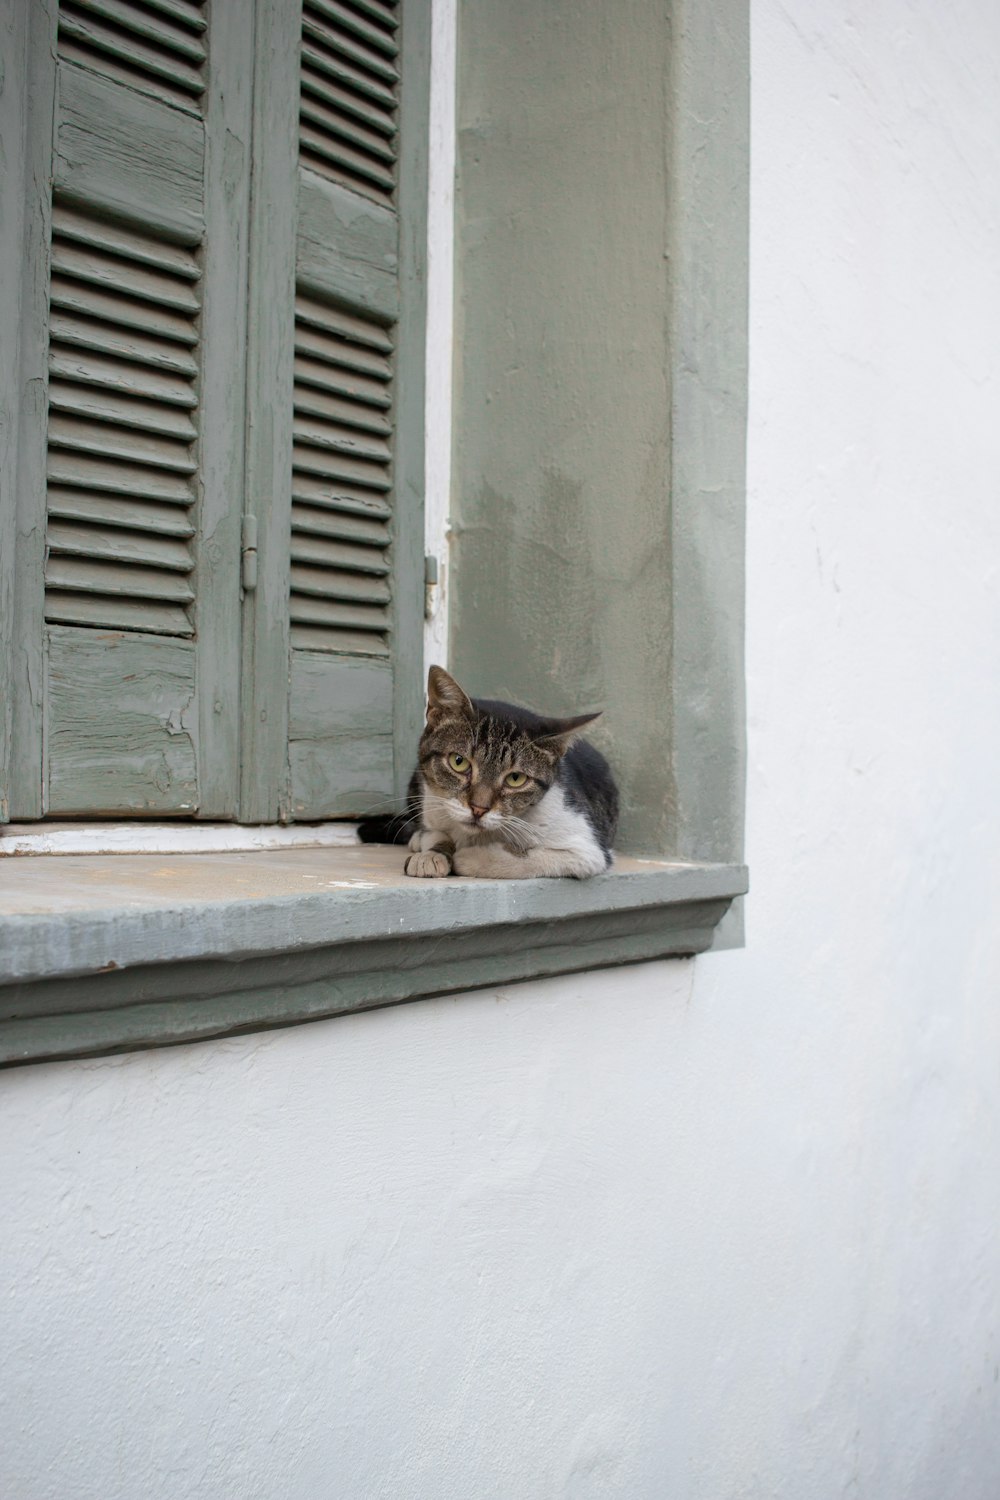 brown and white tabby cat besides gray window louver